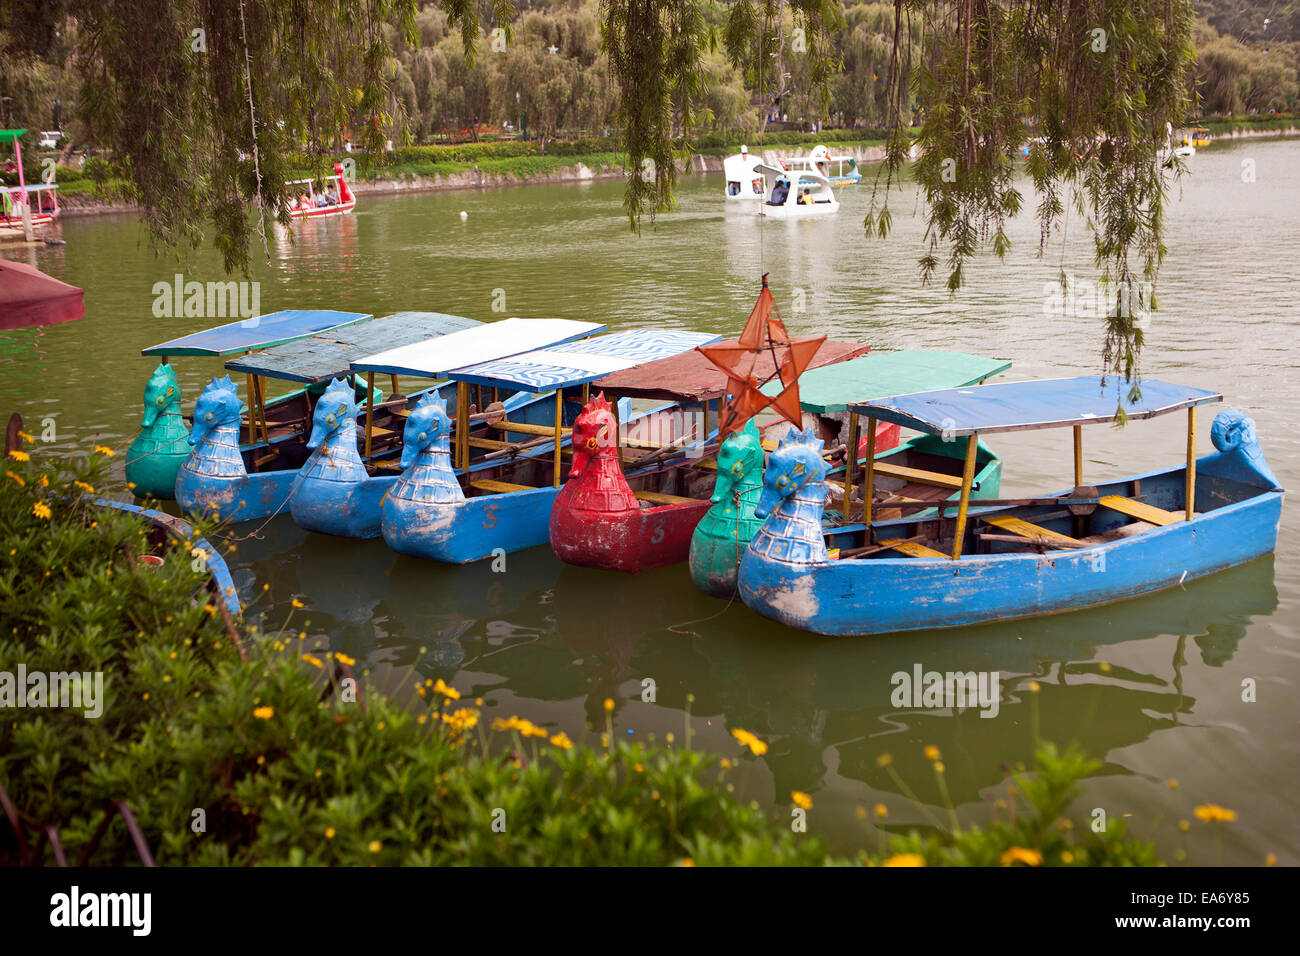 Dragon boats on Burnham Lake in Baguio City, Philippines. Baguio is a favorite vacation spot. Stock Photo